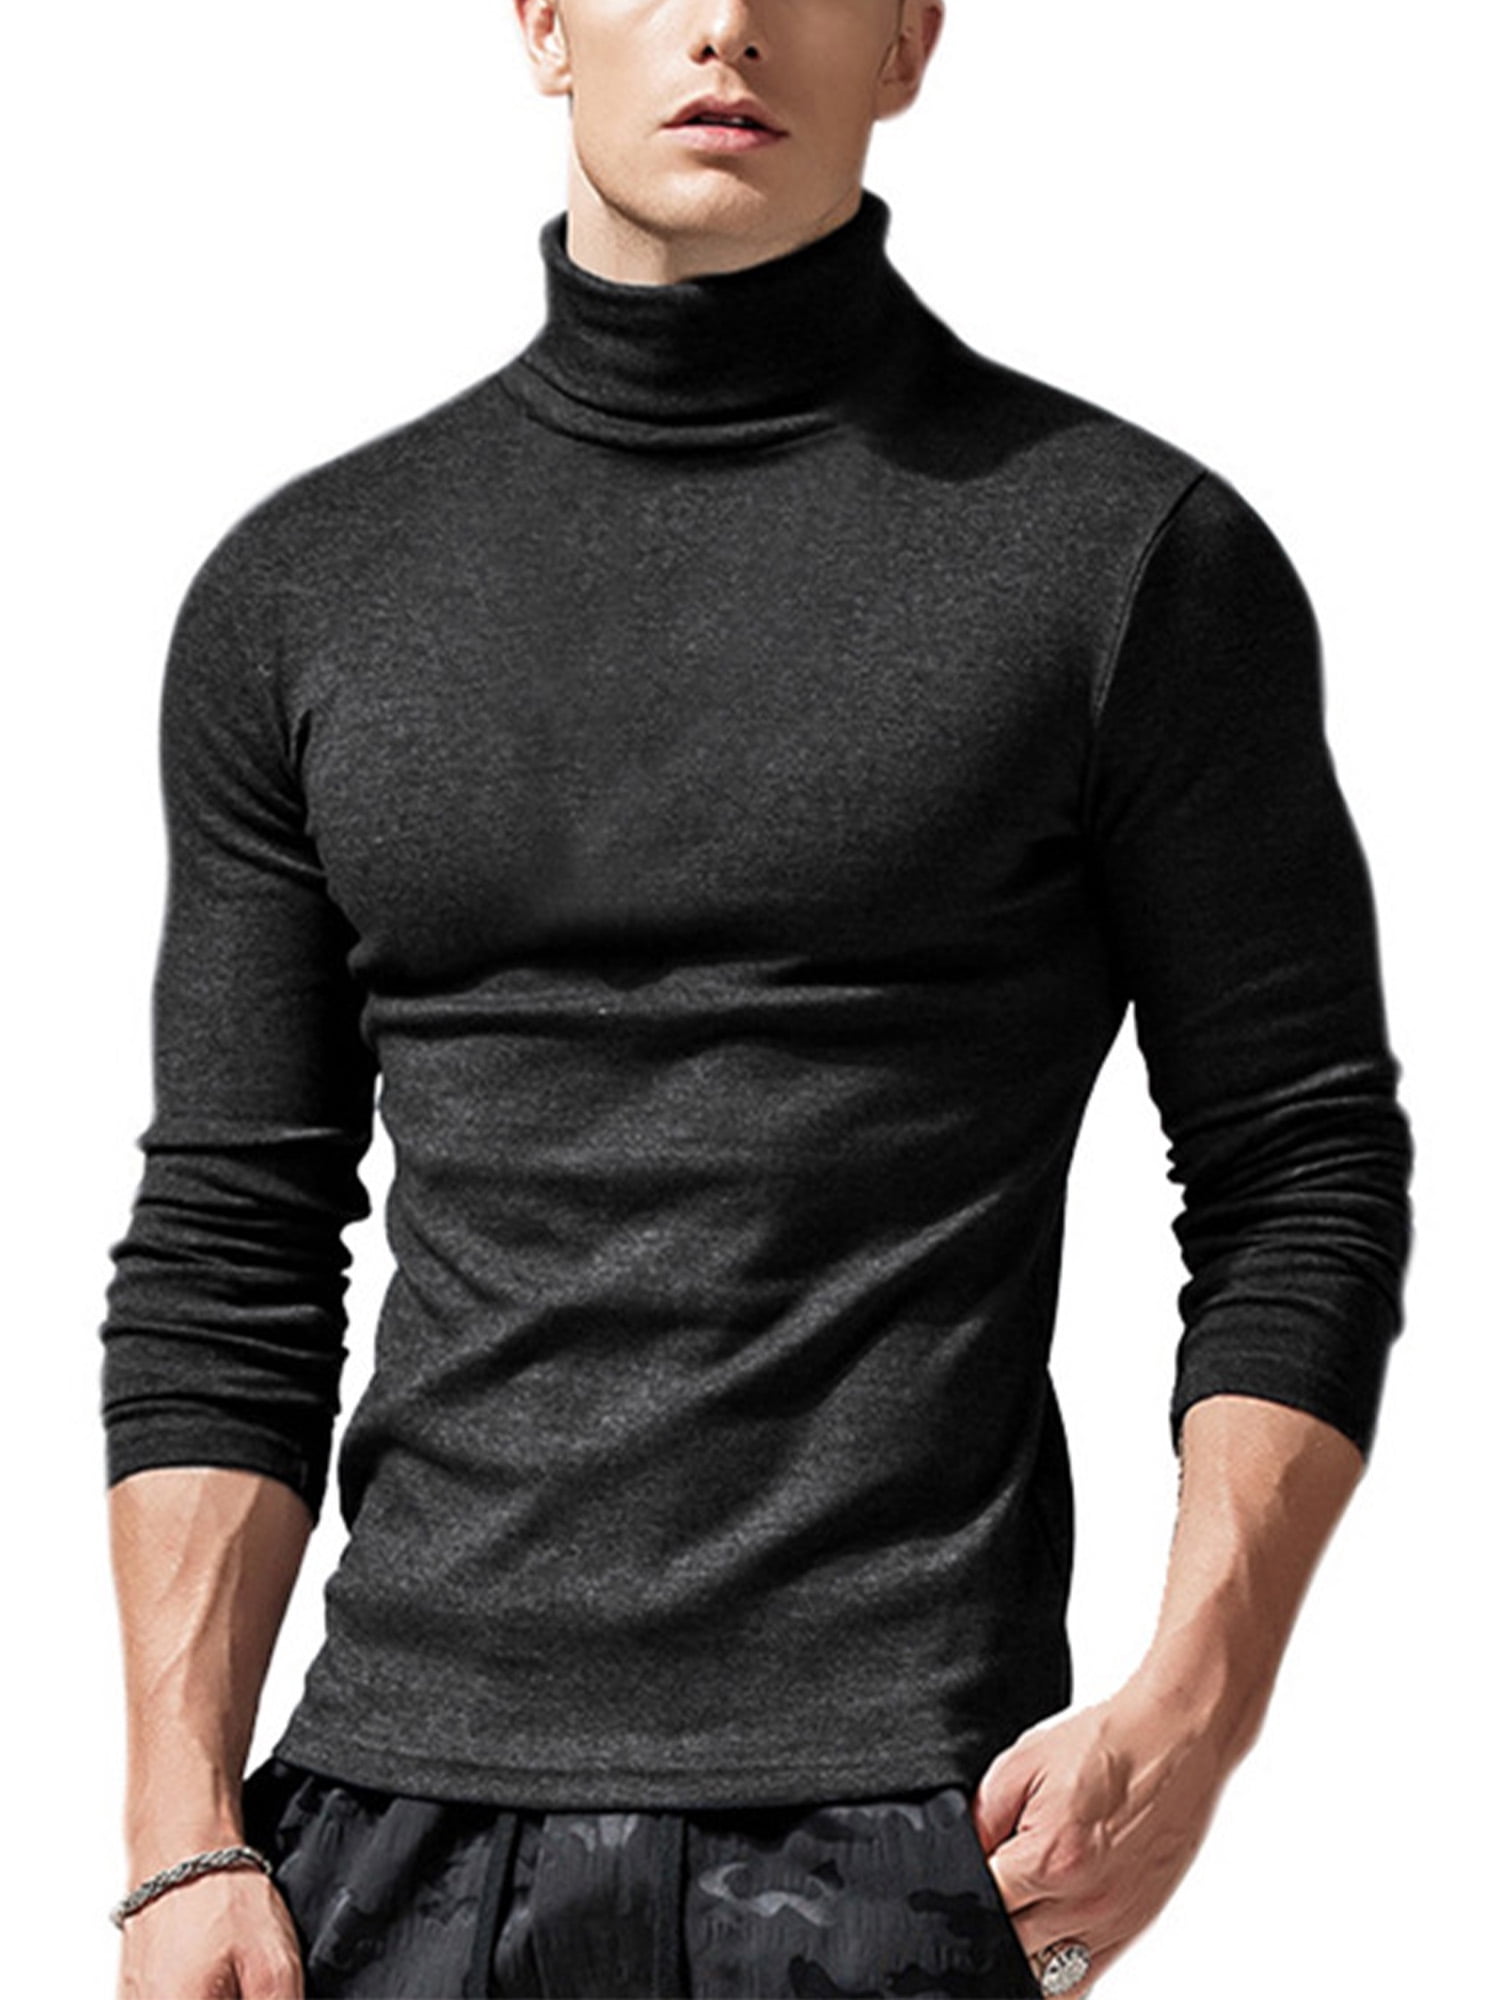 YUNY Mens Basic Knit Solid Long-Sleeve Fit Turtleneck Pullovers Sweater Grey M